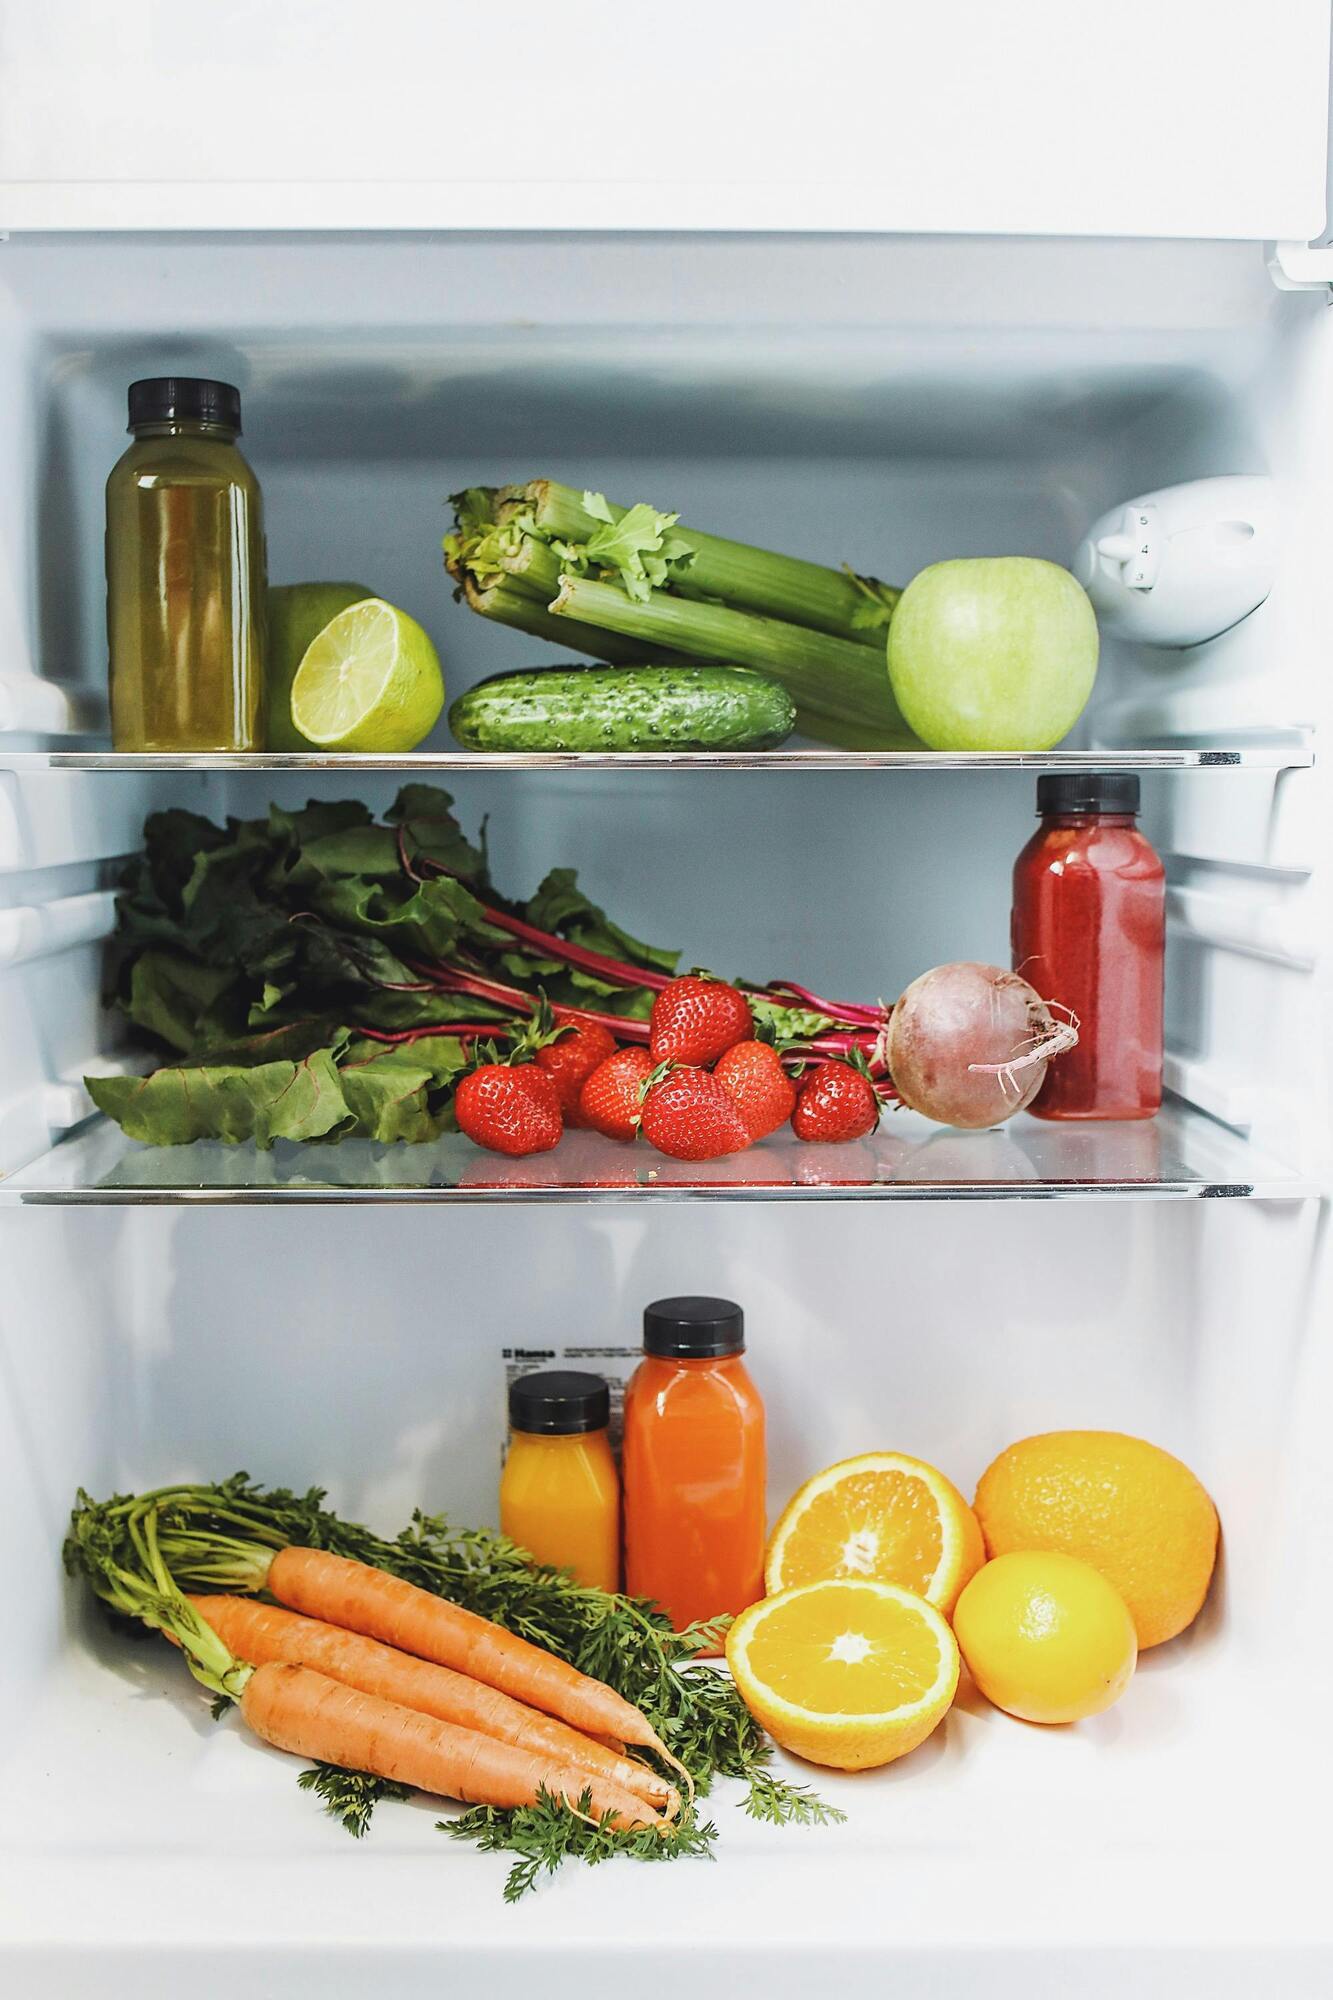 You are definitely filling your fridge wrong: the best places for groceries are named